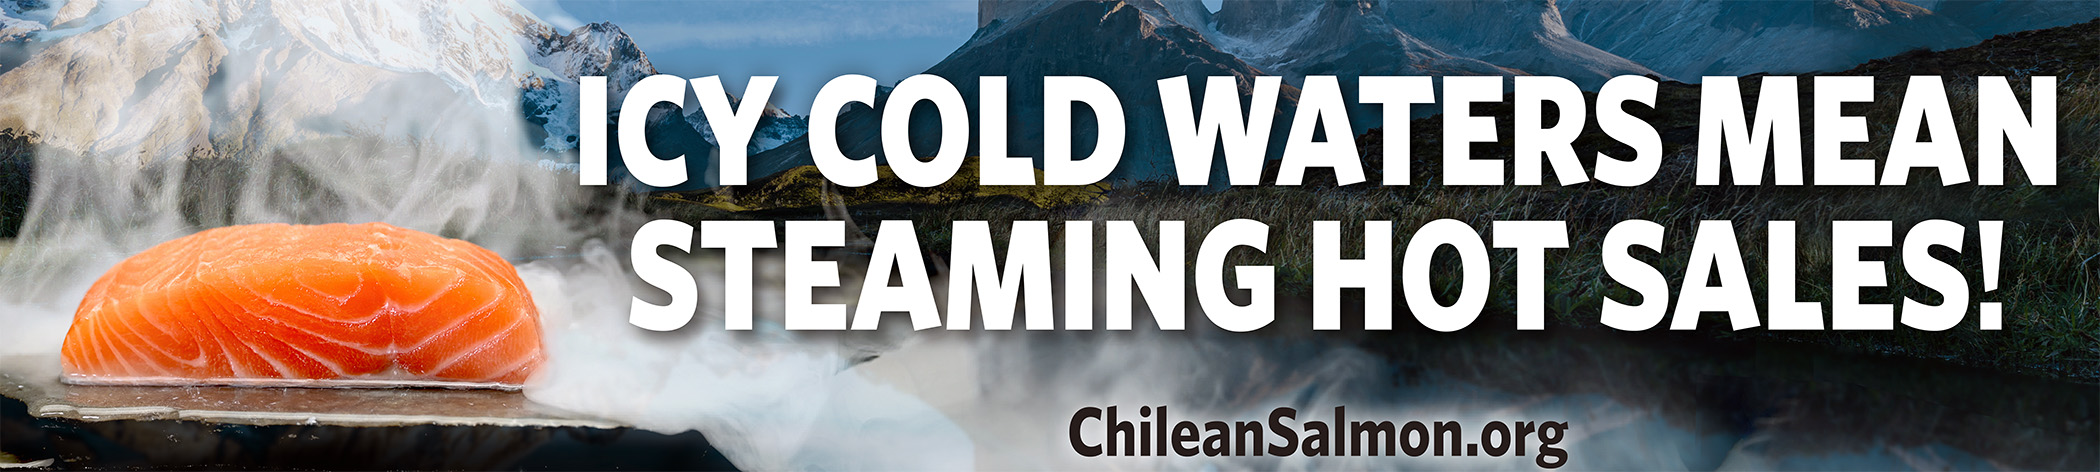 Chilean Salmon Steaming Hot Sales